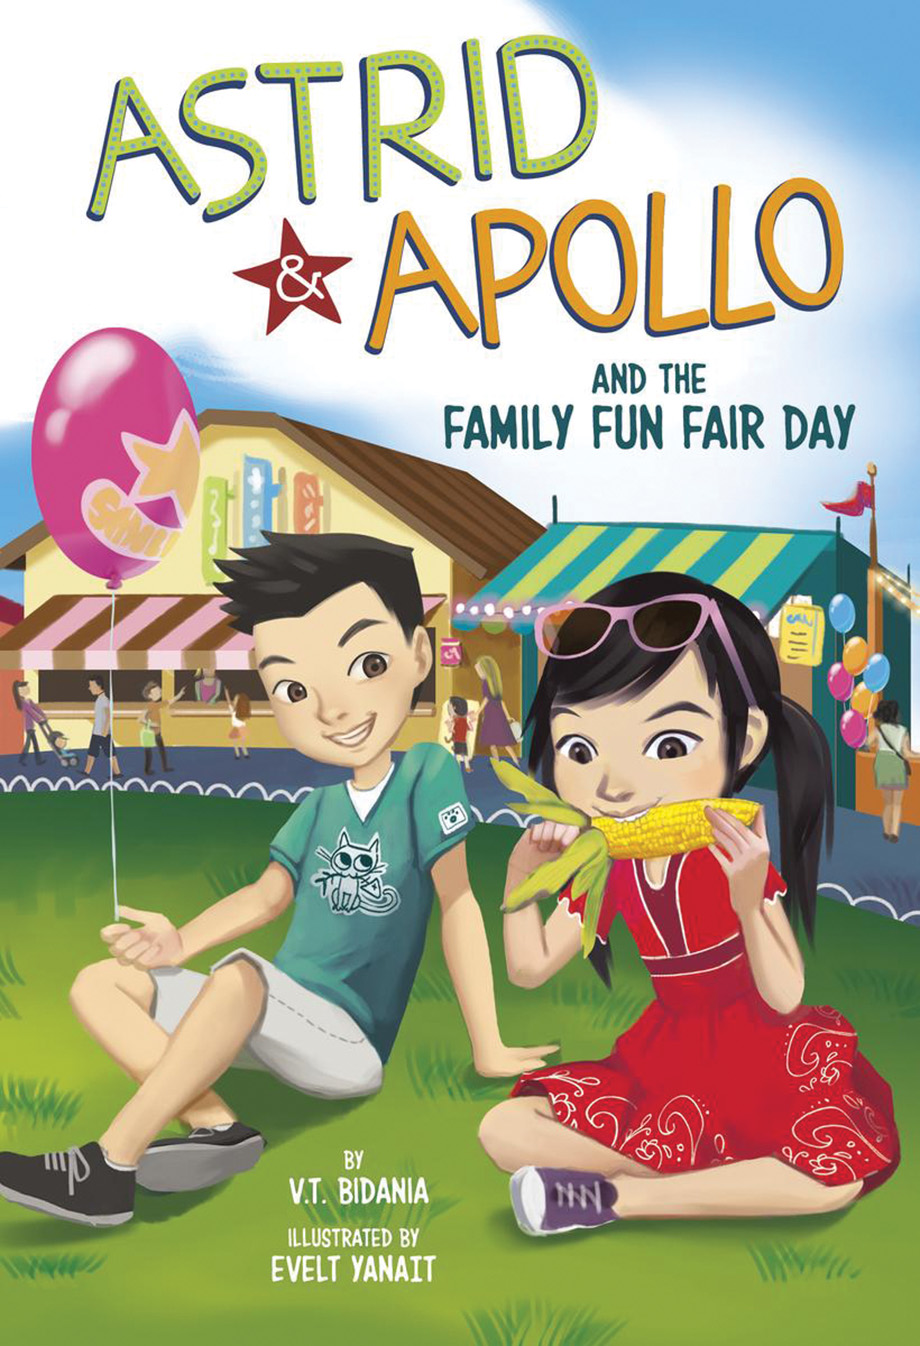 Astrid and Apollo and the Family Fun Fair Day